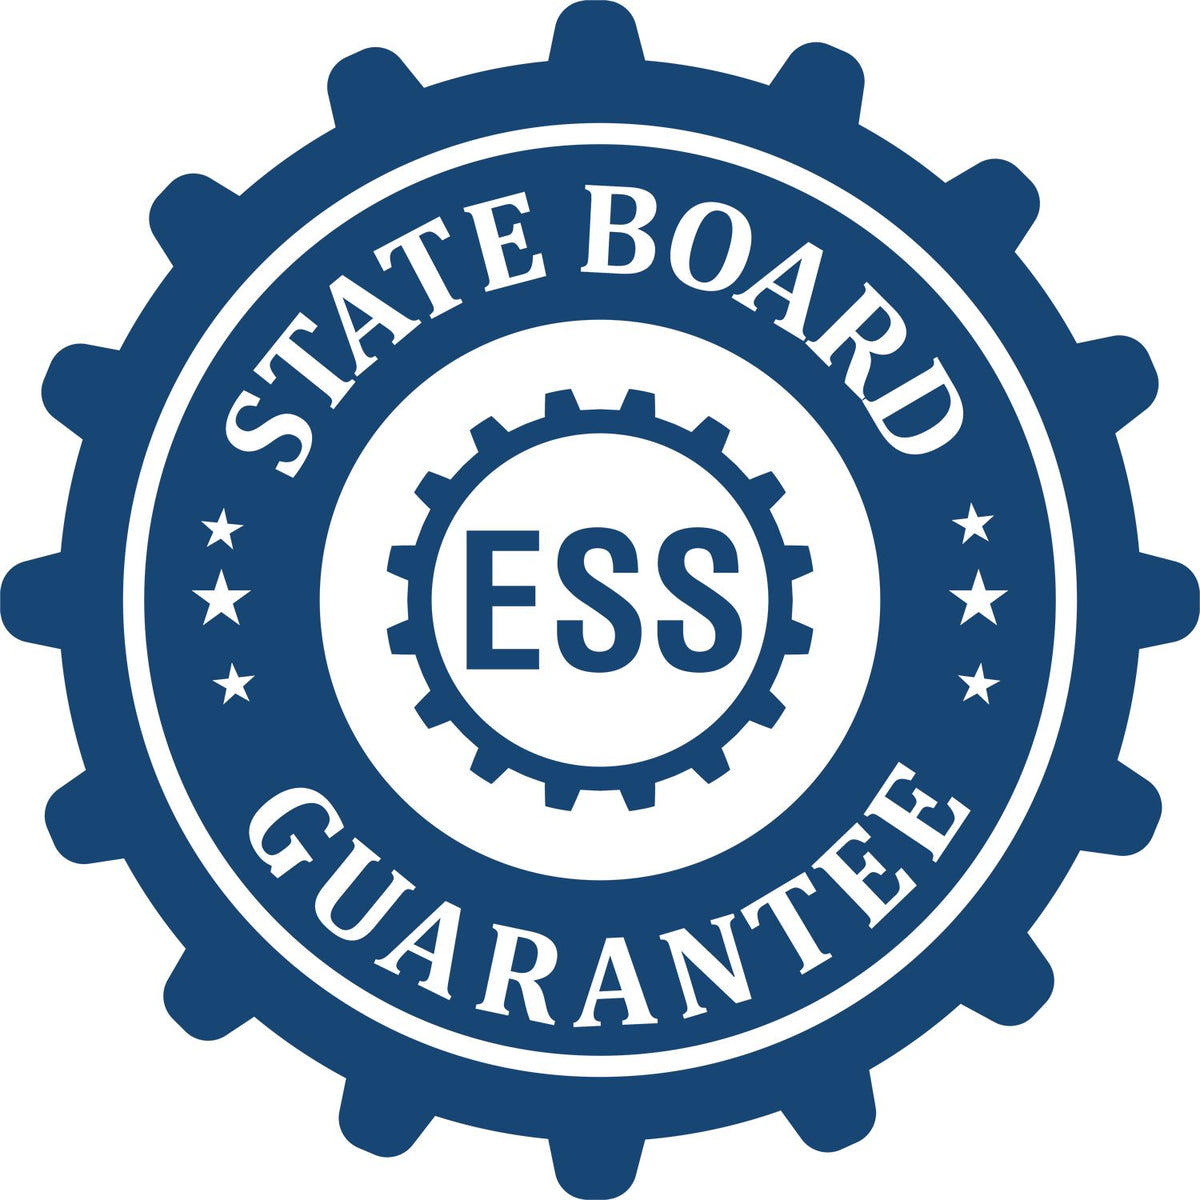 An emblem in a gear shape illustrating a state board guarantee for the Extended Long Reach Louisiana Surveyor Embosser product.